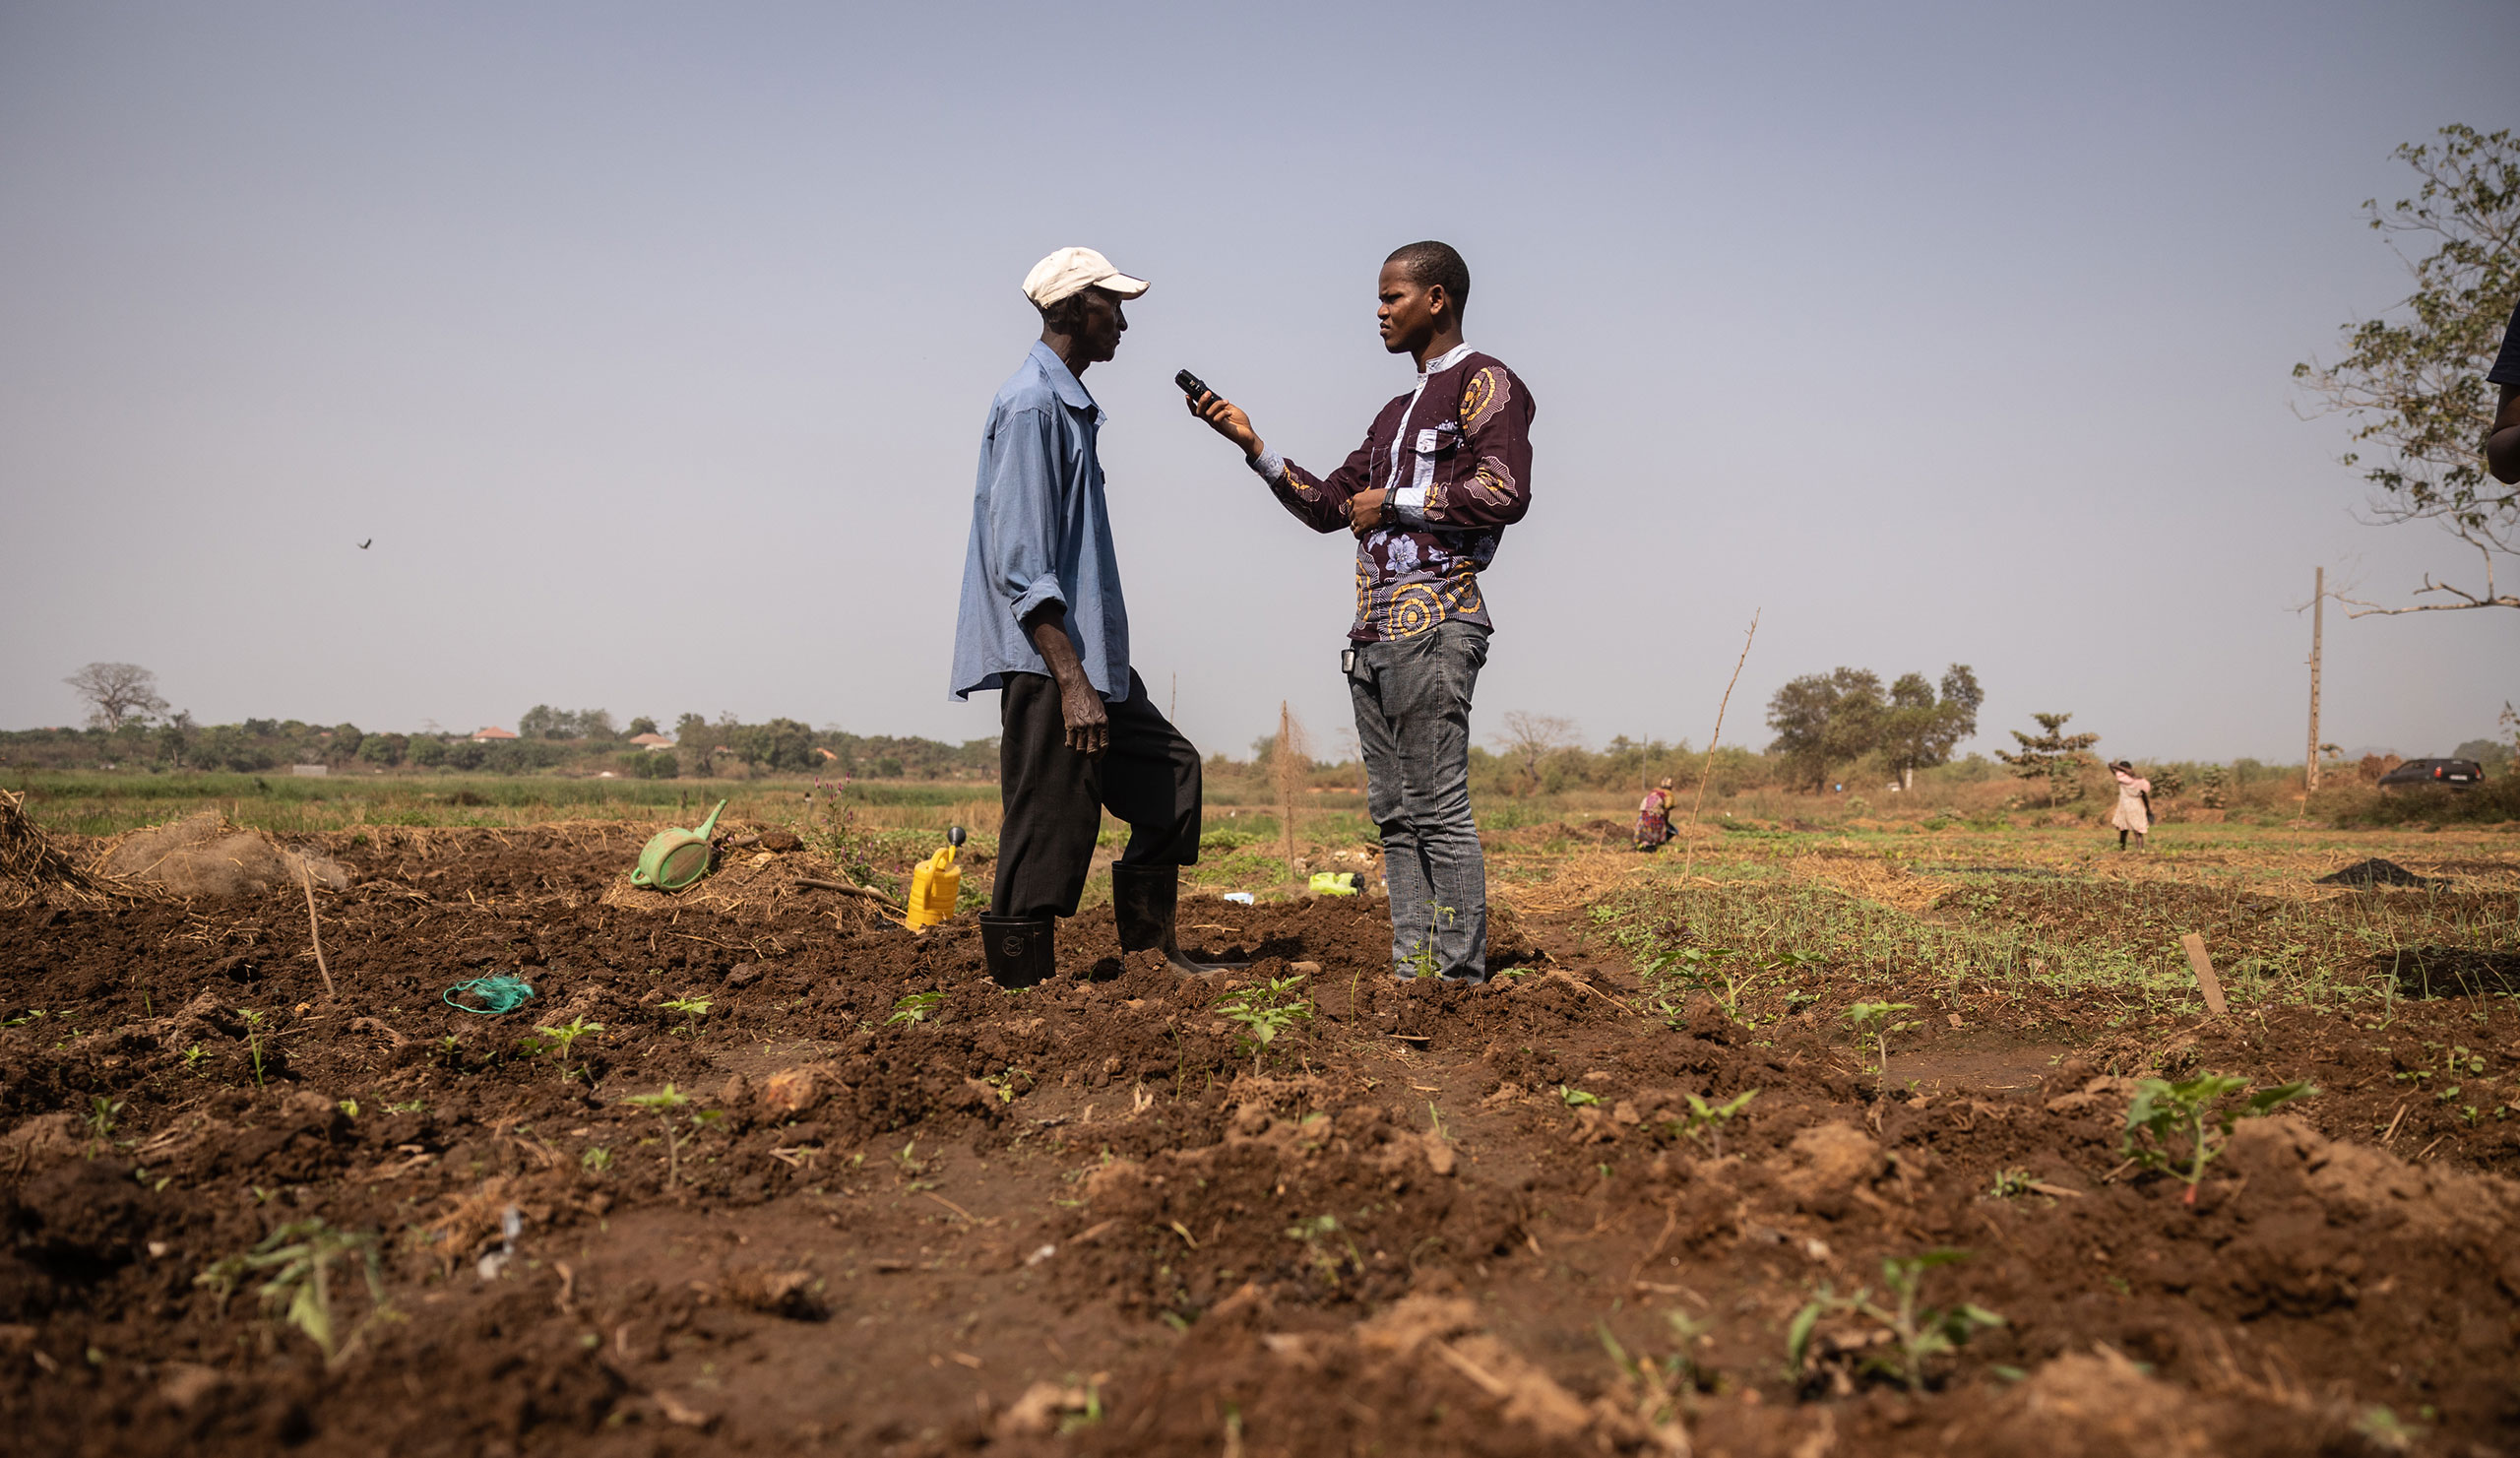 Alpha Oumar Bagou Barry, journalist with the Association of Scientific Journalists of Guinea (AJSG), interviews a man in the context of a micro sidewalk, in the vegetable garden of the Dogbéré district in the city of Dubréka, on February 4, 2022. © Olympia de Maismont / Fondation Hirondelle